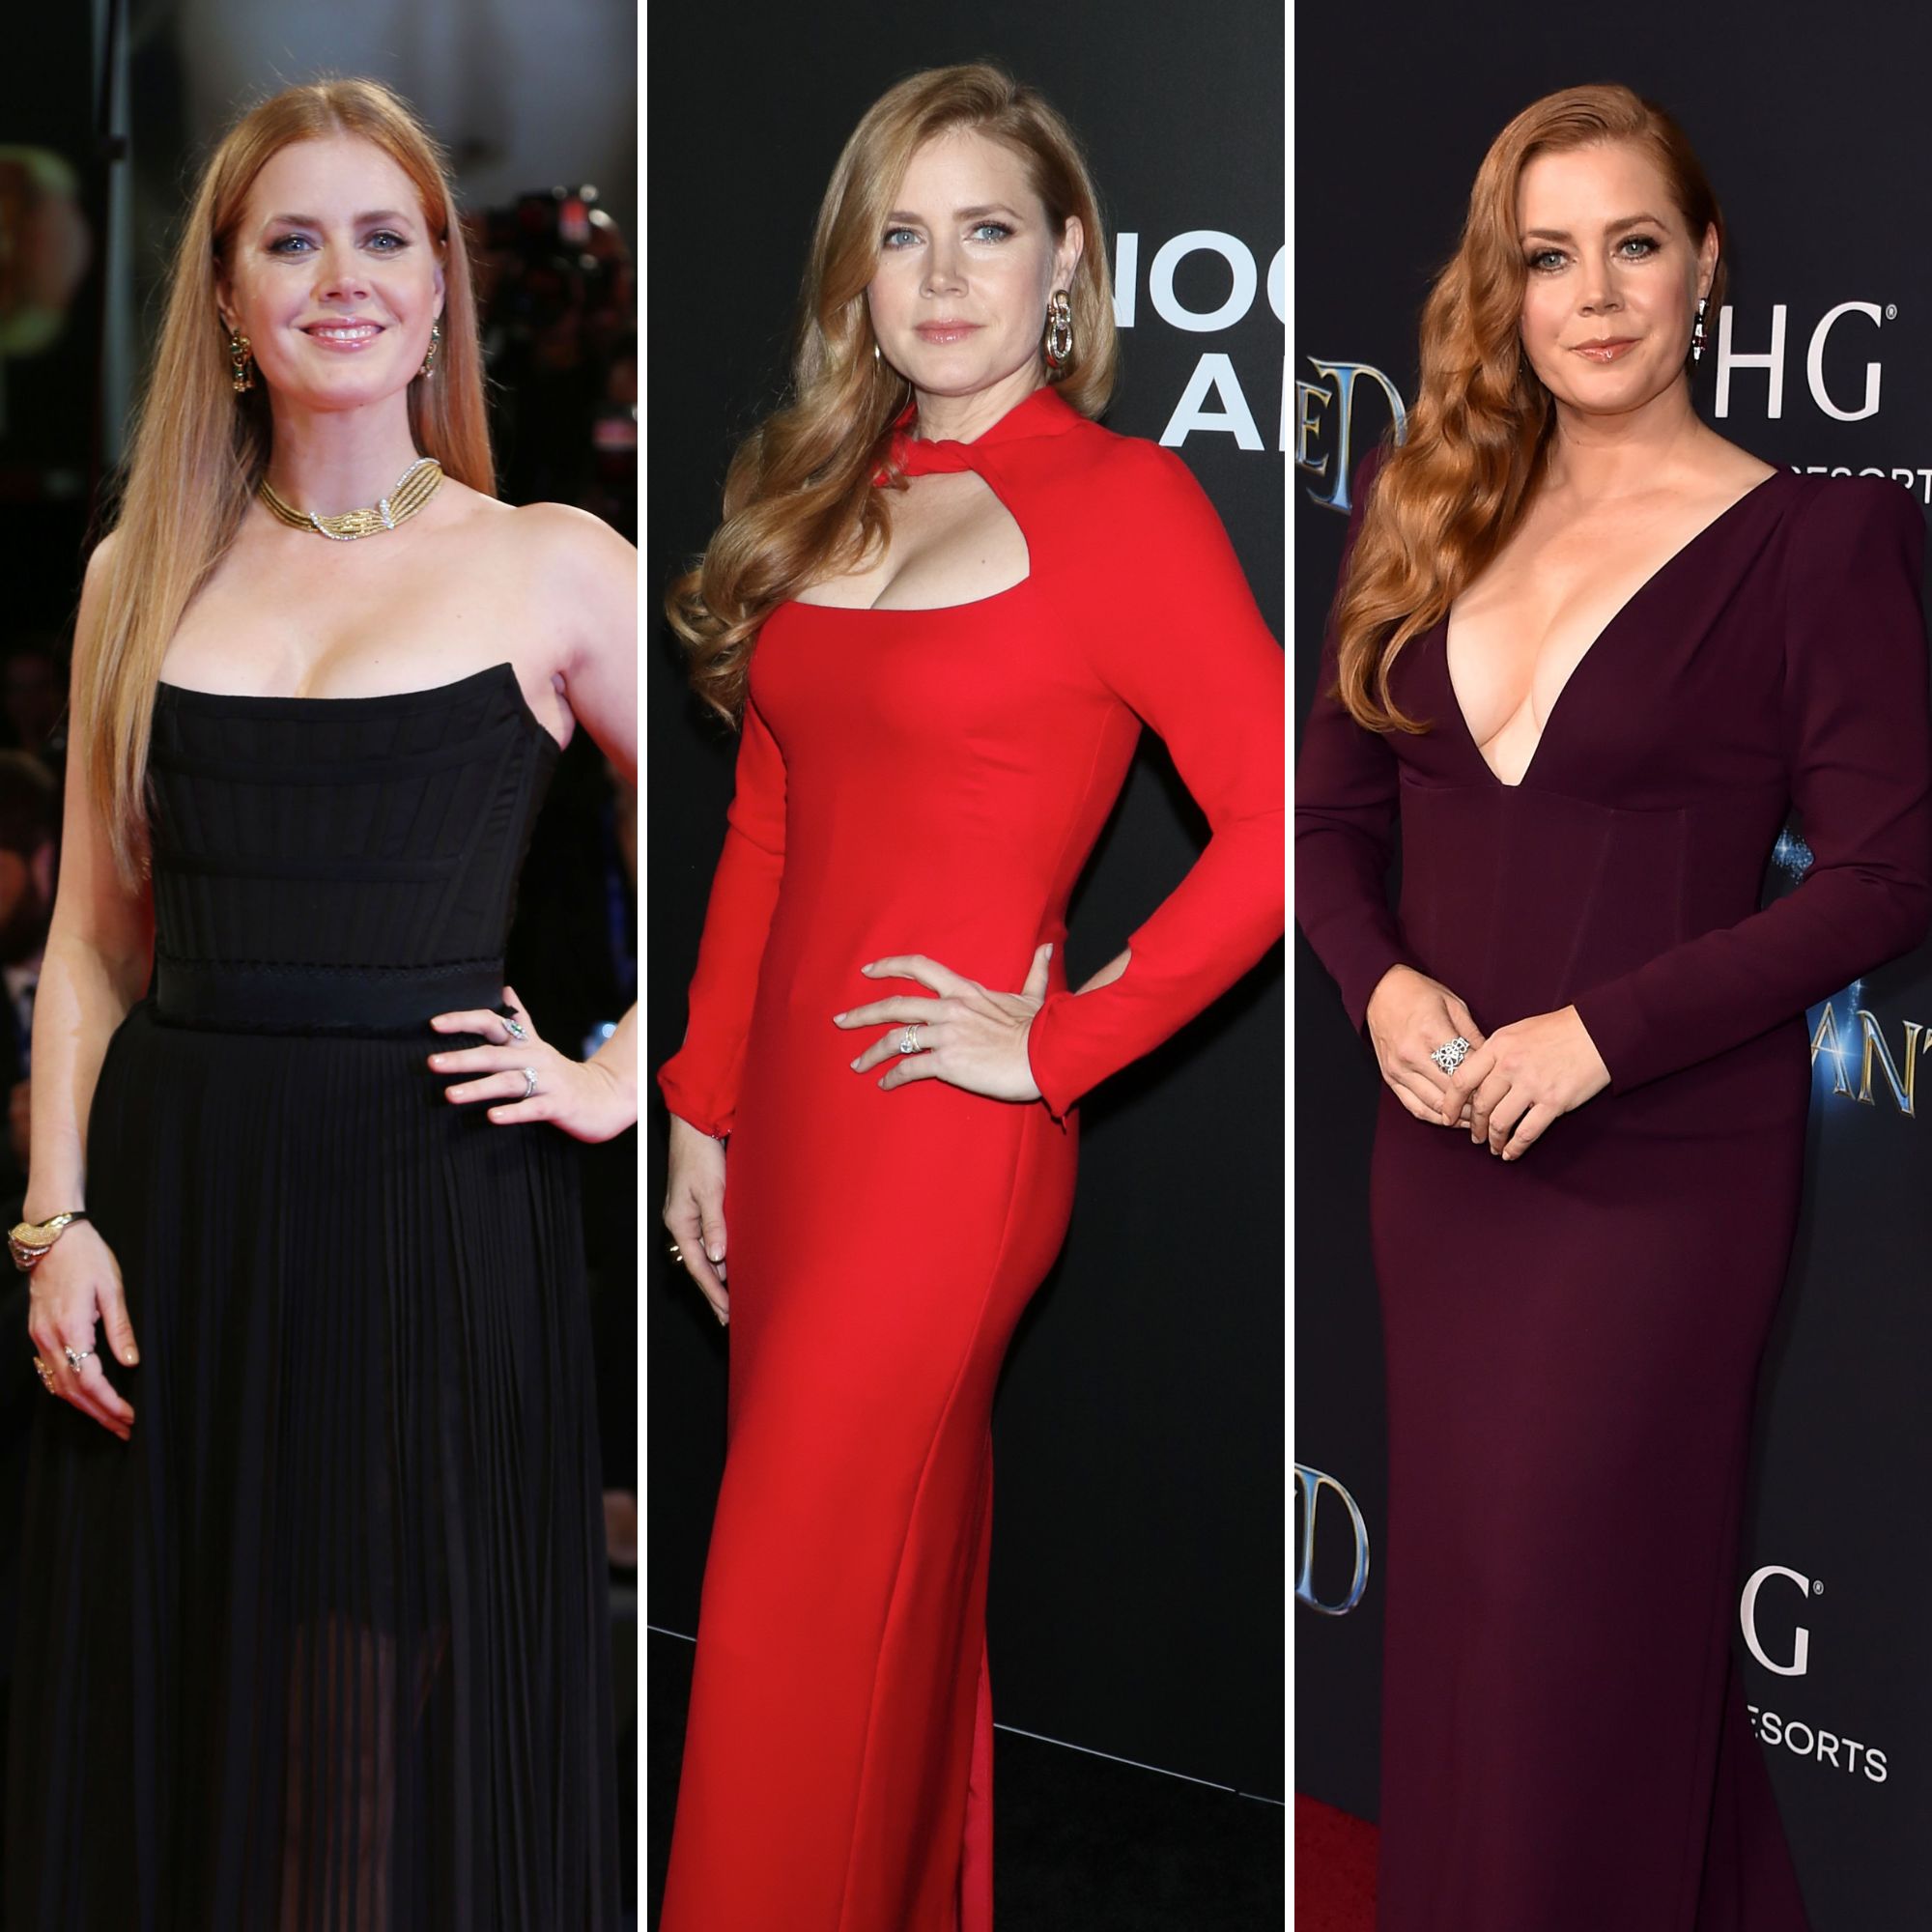 Porn Of Amy Adams - Amy Adams Braless Photos: Pictures of Actress Without a Bra